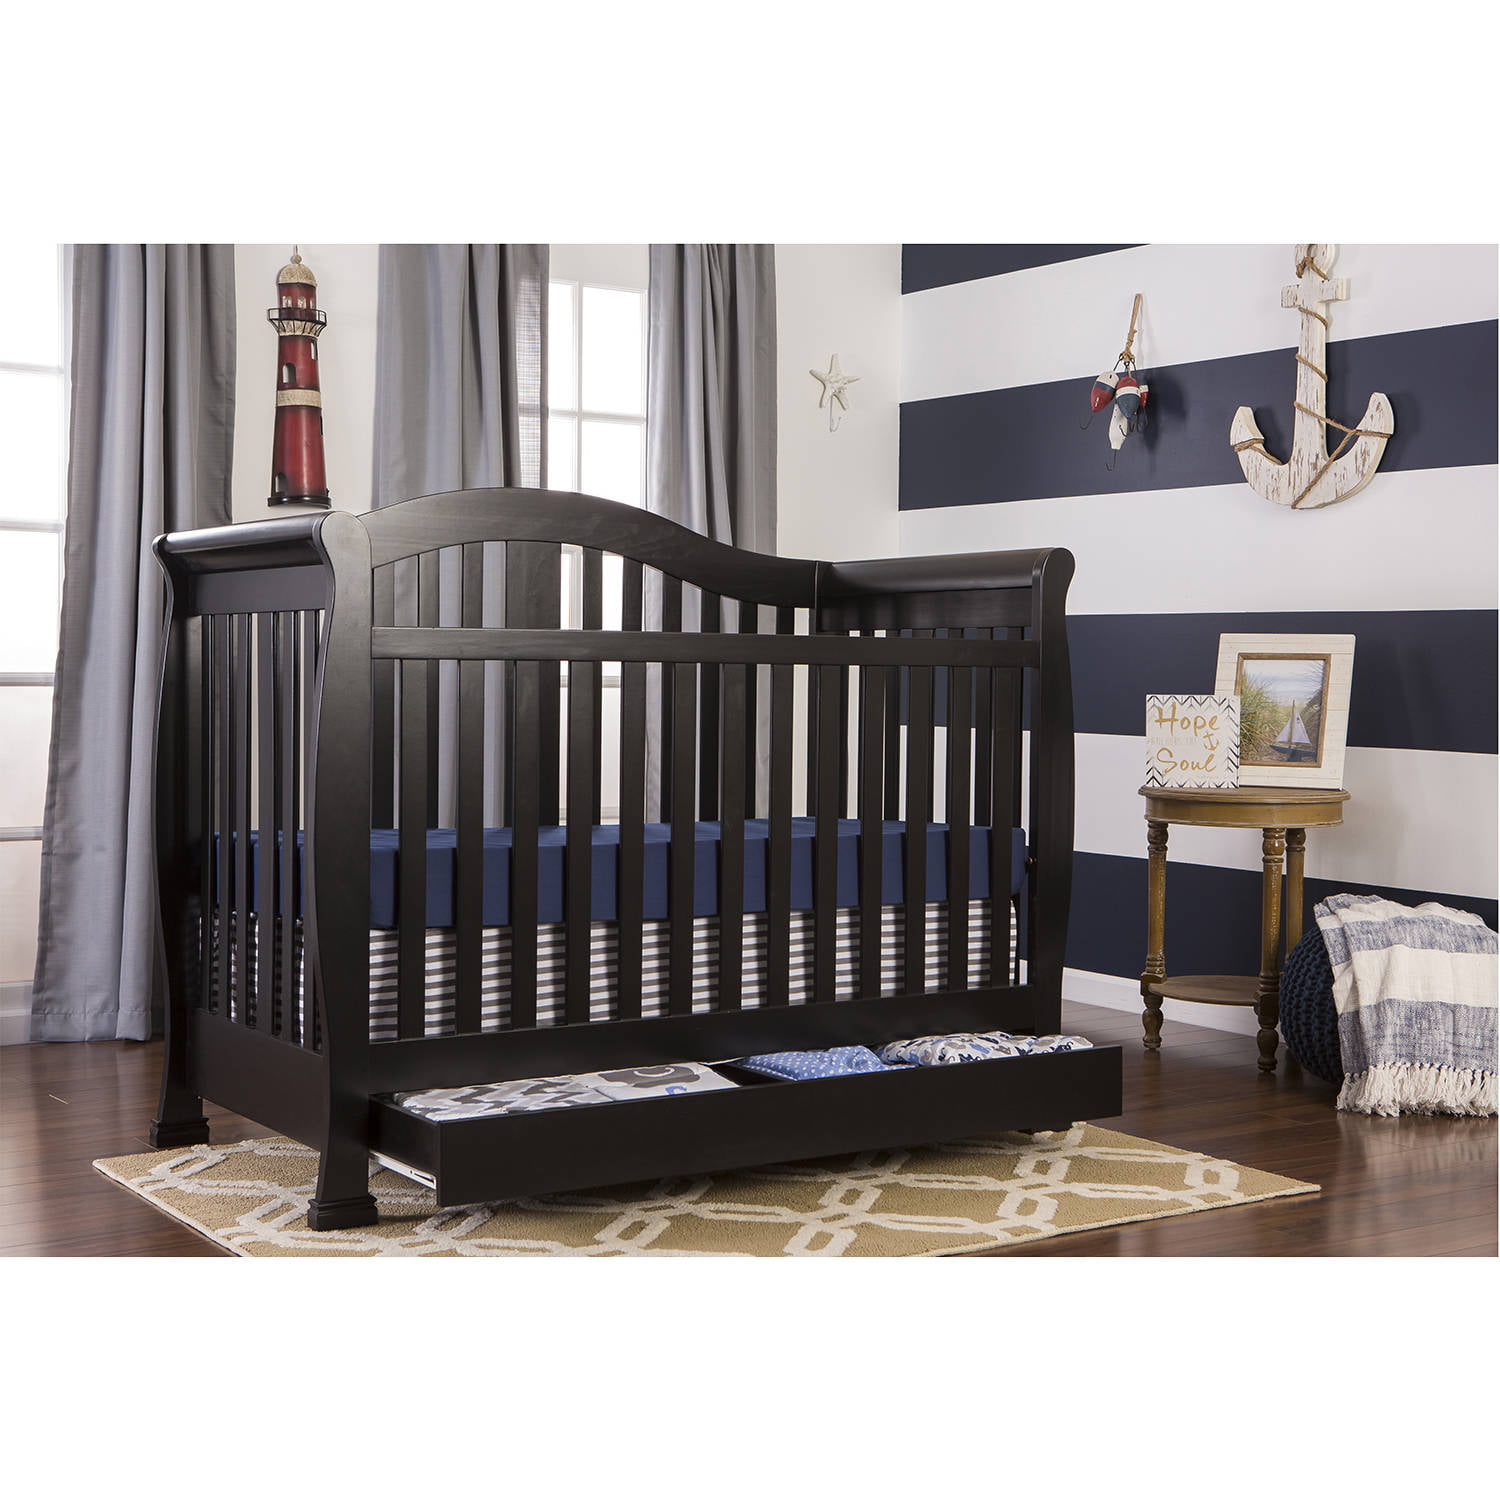 5in1 Convertible Crib with Storage Drawer Toddler Daybed